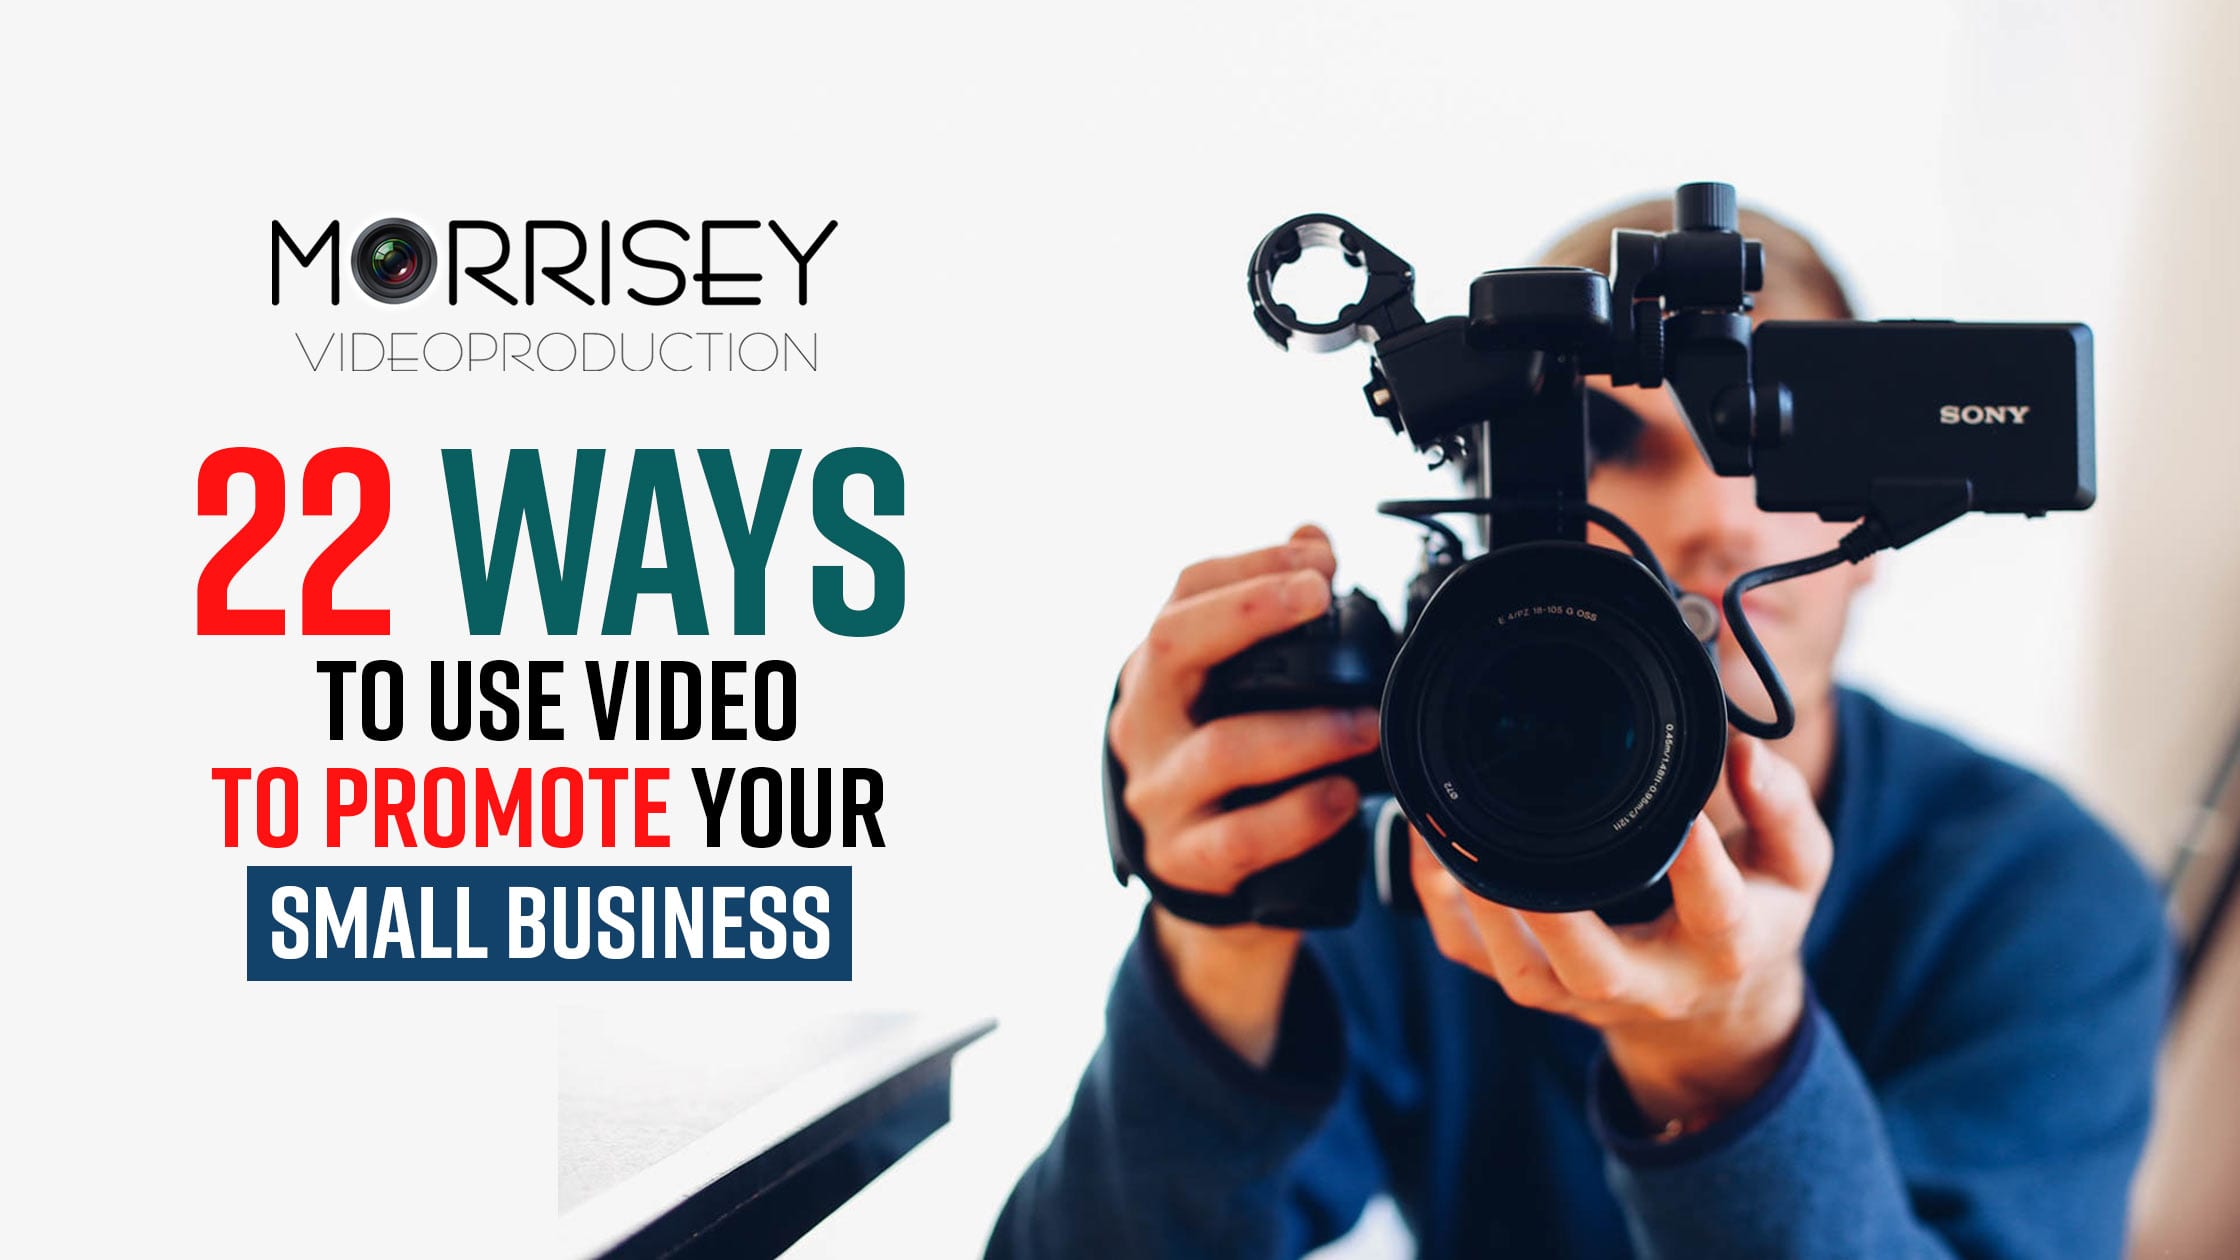 Use Video To Promote Your Small Business